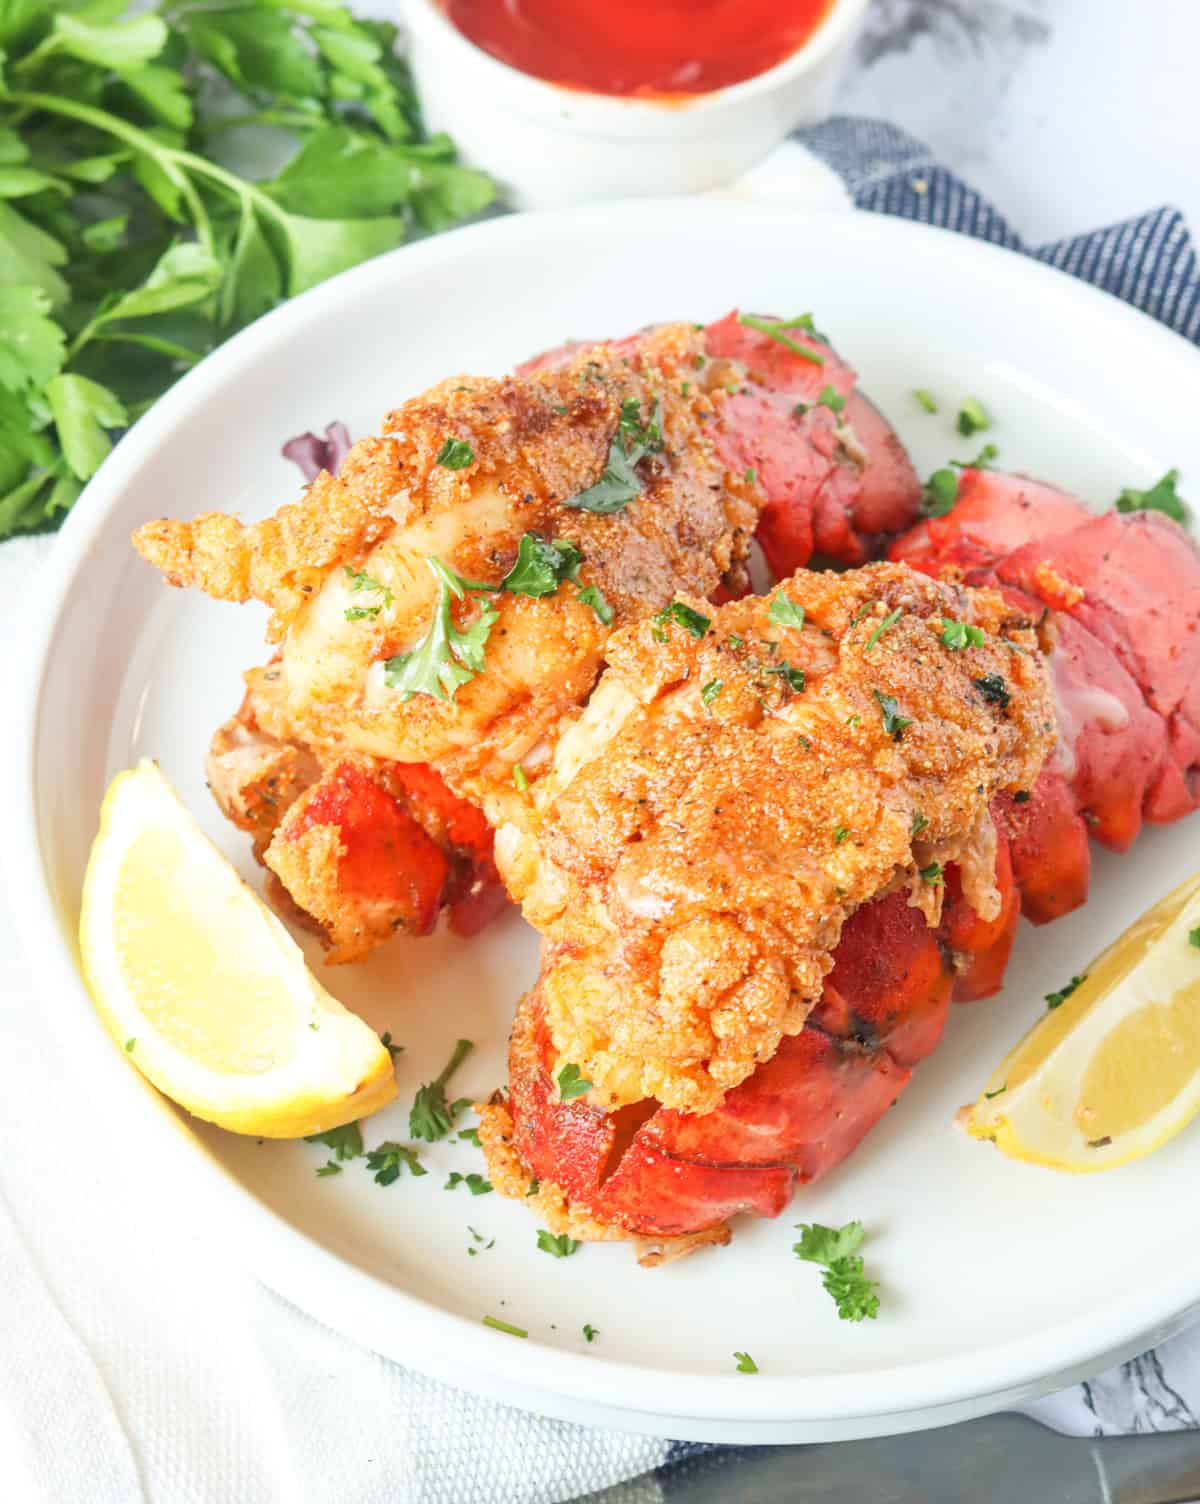 Enjoy decadent fried lobster tails with lemon wedges